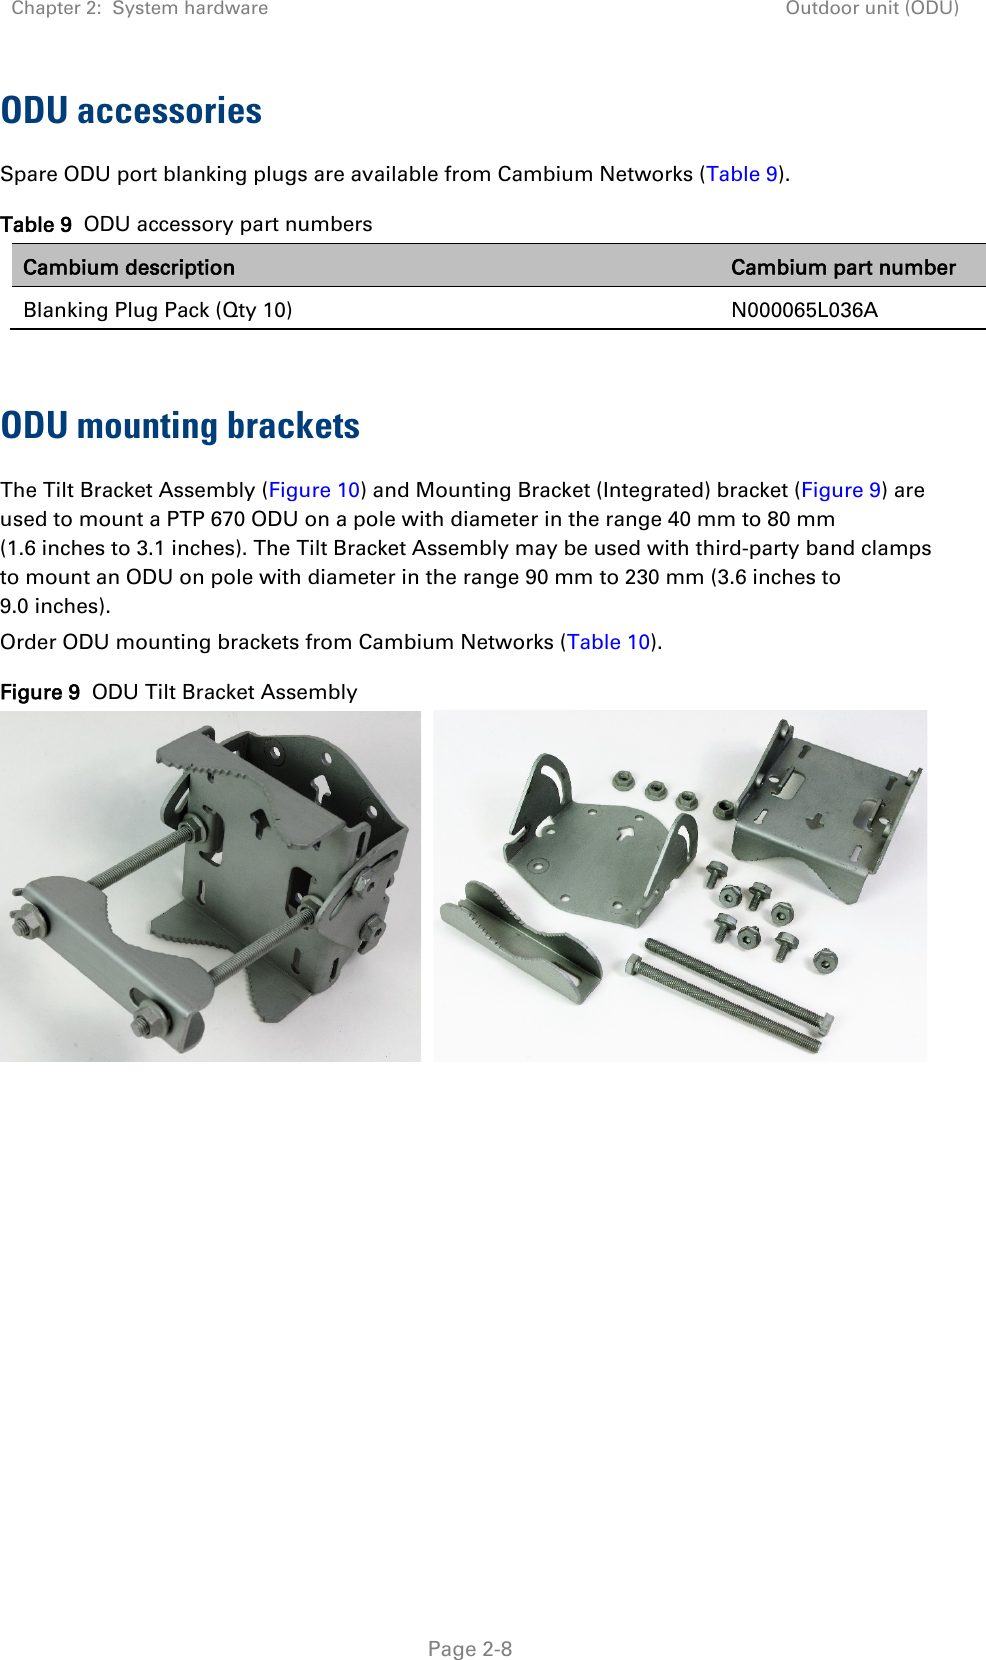 Chapter 2:  System hardware Outdoor unit (ODU)   Page 2-8 ODU accessories Spare ODU port blanking plugs are available from Cambium Networks (Table 9). Table 9  ODU accessory part numbers Cambium description Cambium part number Blanking Plug Pack (Qty 10) N000065L036A  ODU mounting brackets The Tilt Bracket Assembly (Figure 10) and Mounting Bracket (Integrated) bracket (Figure 9) are used to mount a PTP 670 ODU on a pole with diameter in the range 40 mm to 80 mm (1.6 inches to 3.1 inches). The Tilt Bracket Assembly may be used with third-party band clamps to mount an ODU on pole with diameter in the range 90 mm to 230 mm (3.6 inches to 9.0 inches). Order ODU mounting brackets from Cambium Networks (Table 10). Figure 9  ODU Tilt Bracket Assembly      